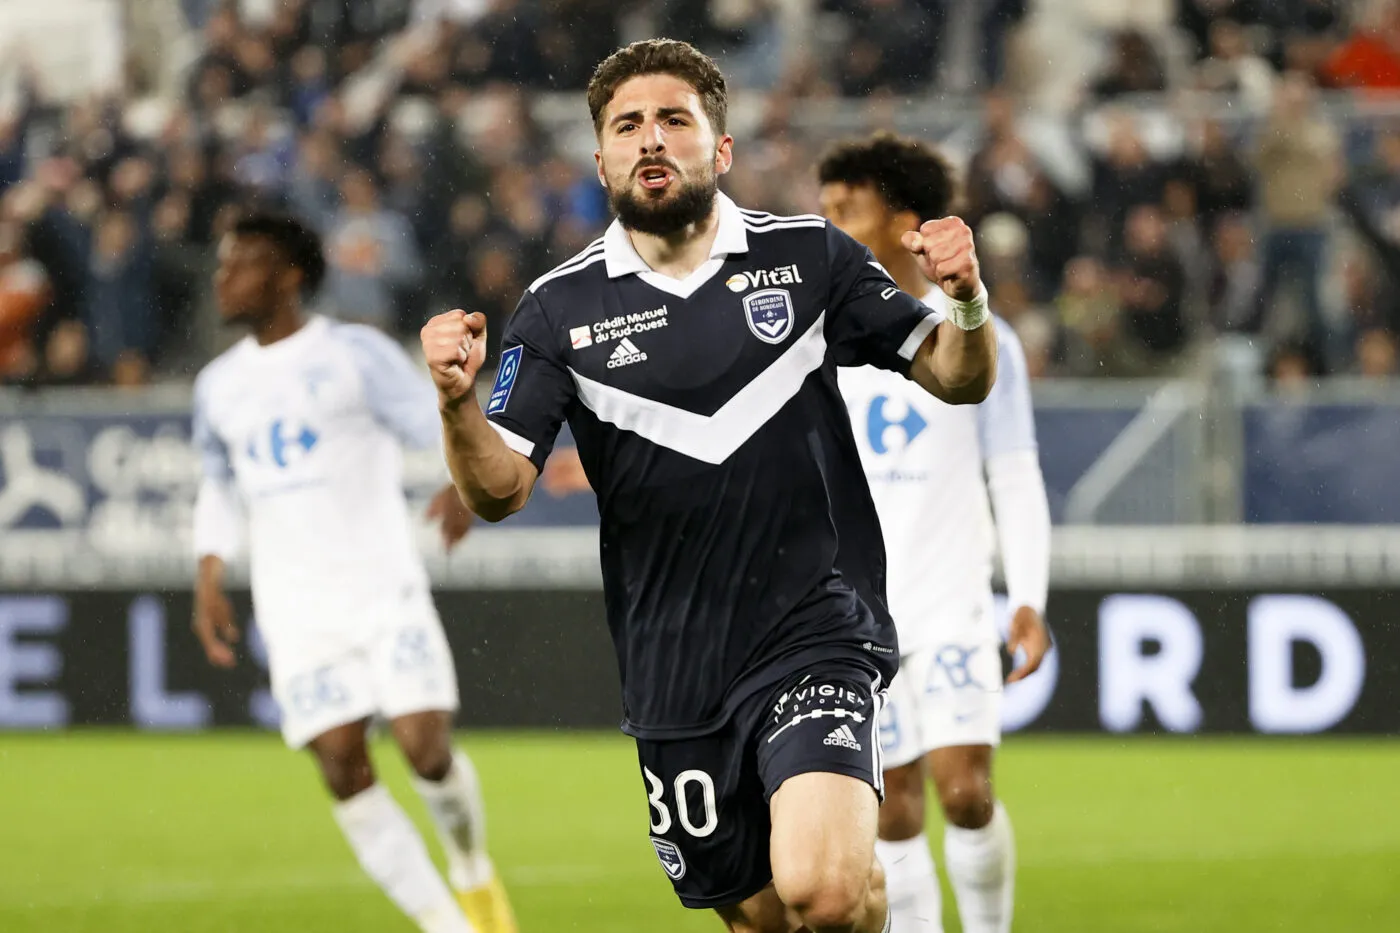 30 Zuriko DAVITASHVILI (fcgb) during the Ligue 2 BKT match between Bordeaux and Grenoble at Stade Matmut Atlantique on April 24, 2023 in Bordeaux, France. (Photo by Romain Perrocheau/FEP/Icon Sport)